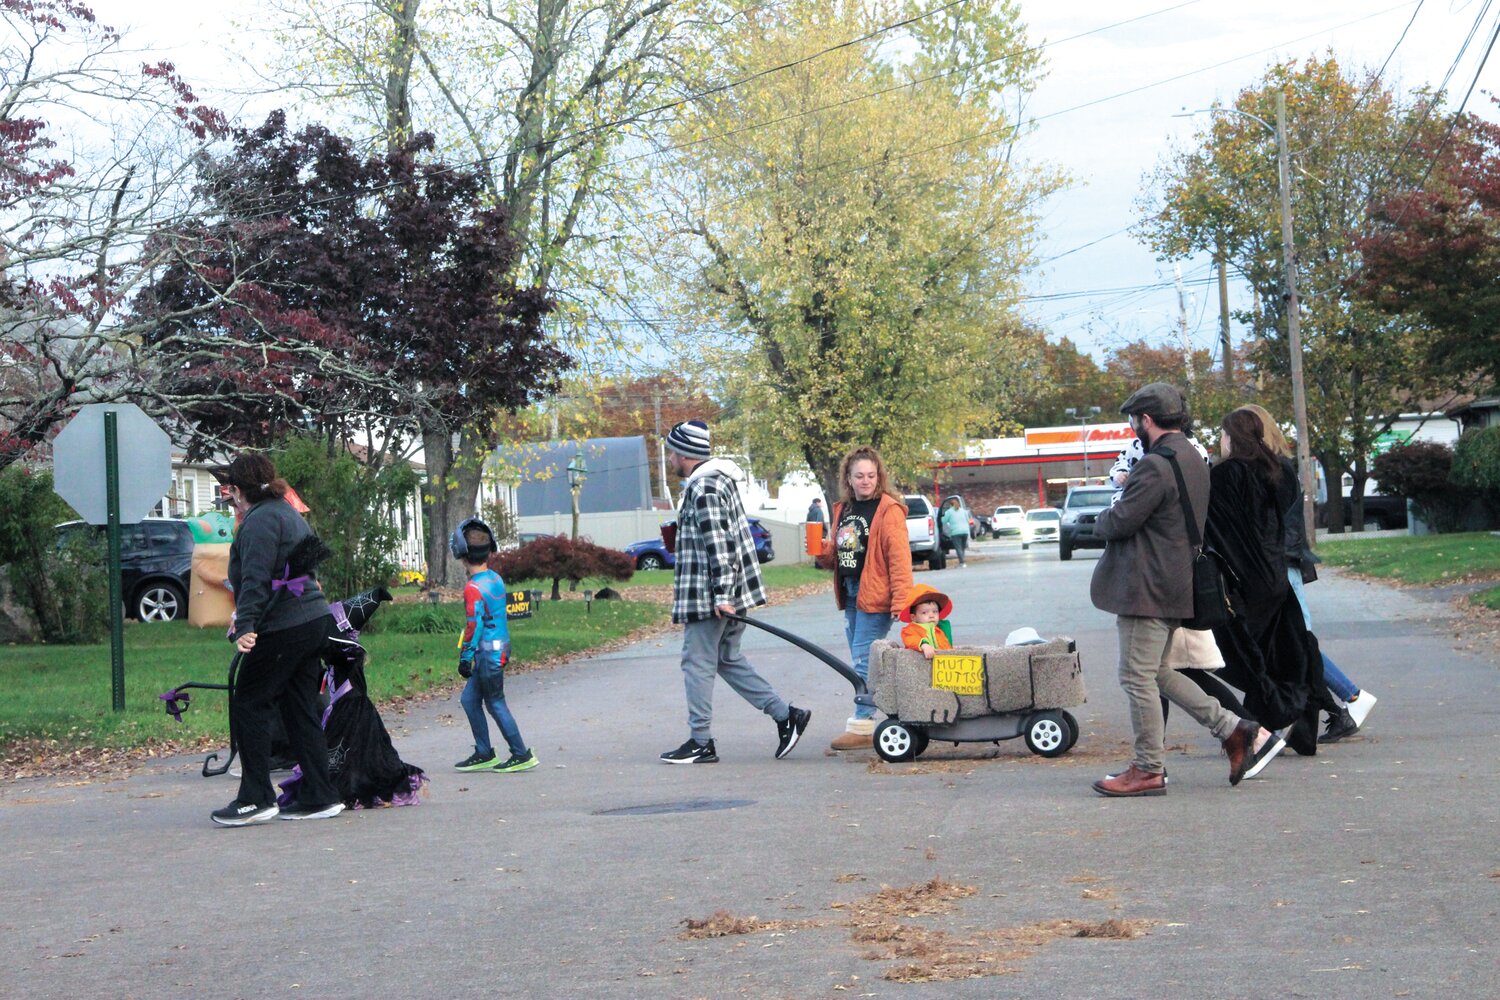 READY TO HAUNT THE NEIGHBORHOOD: Tick or treaters make their way to the start of the Halloween parade.